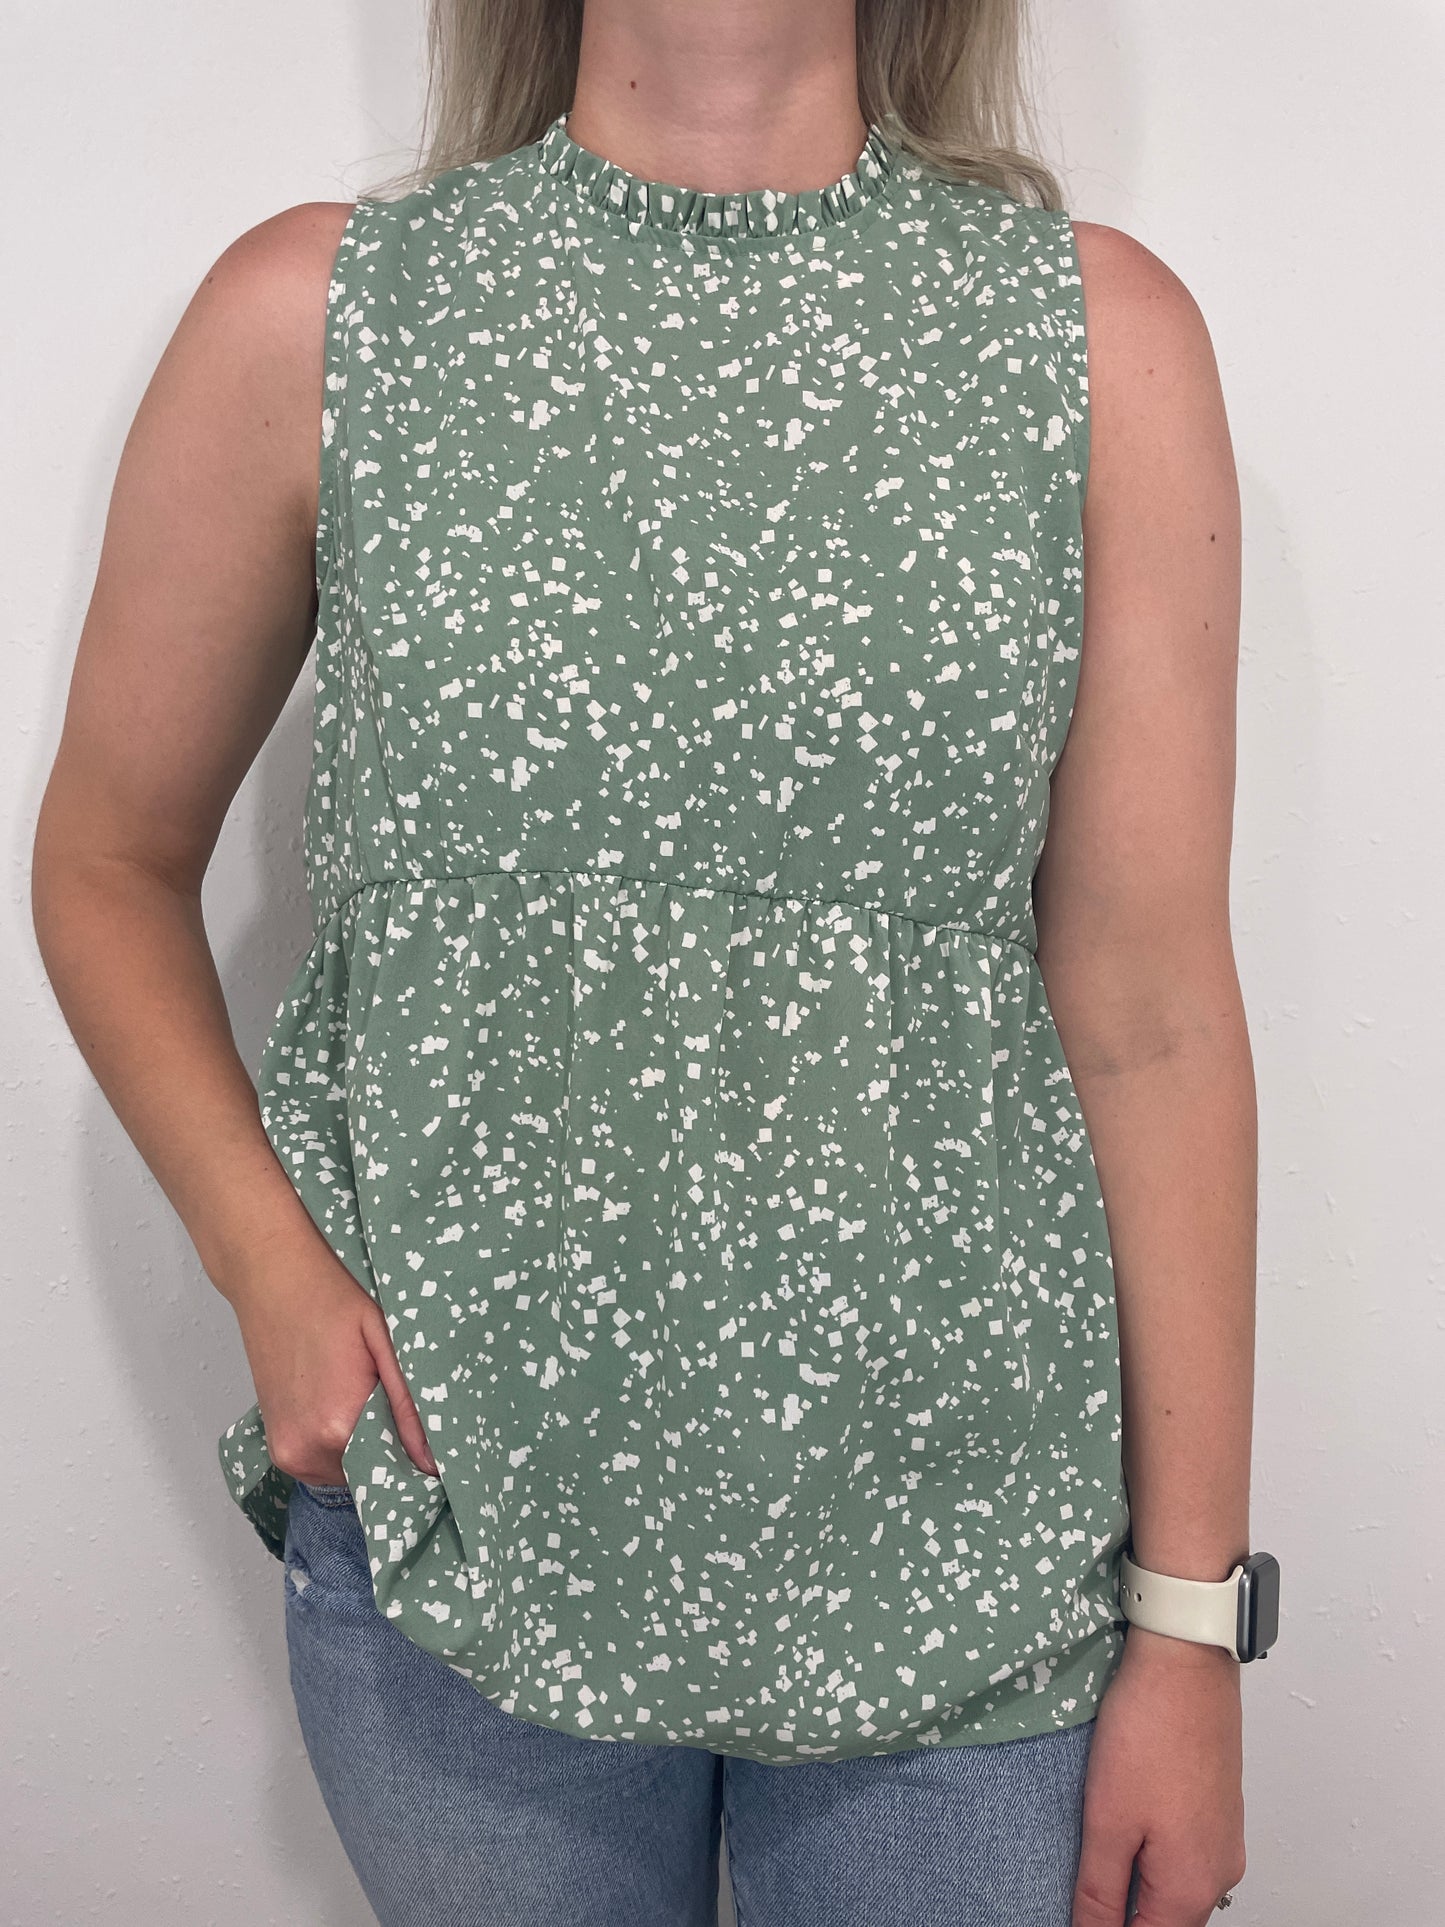 MOMENT IN TIME PEPLUM TANK - SAGE/WHITE